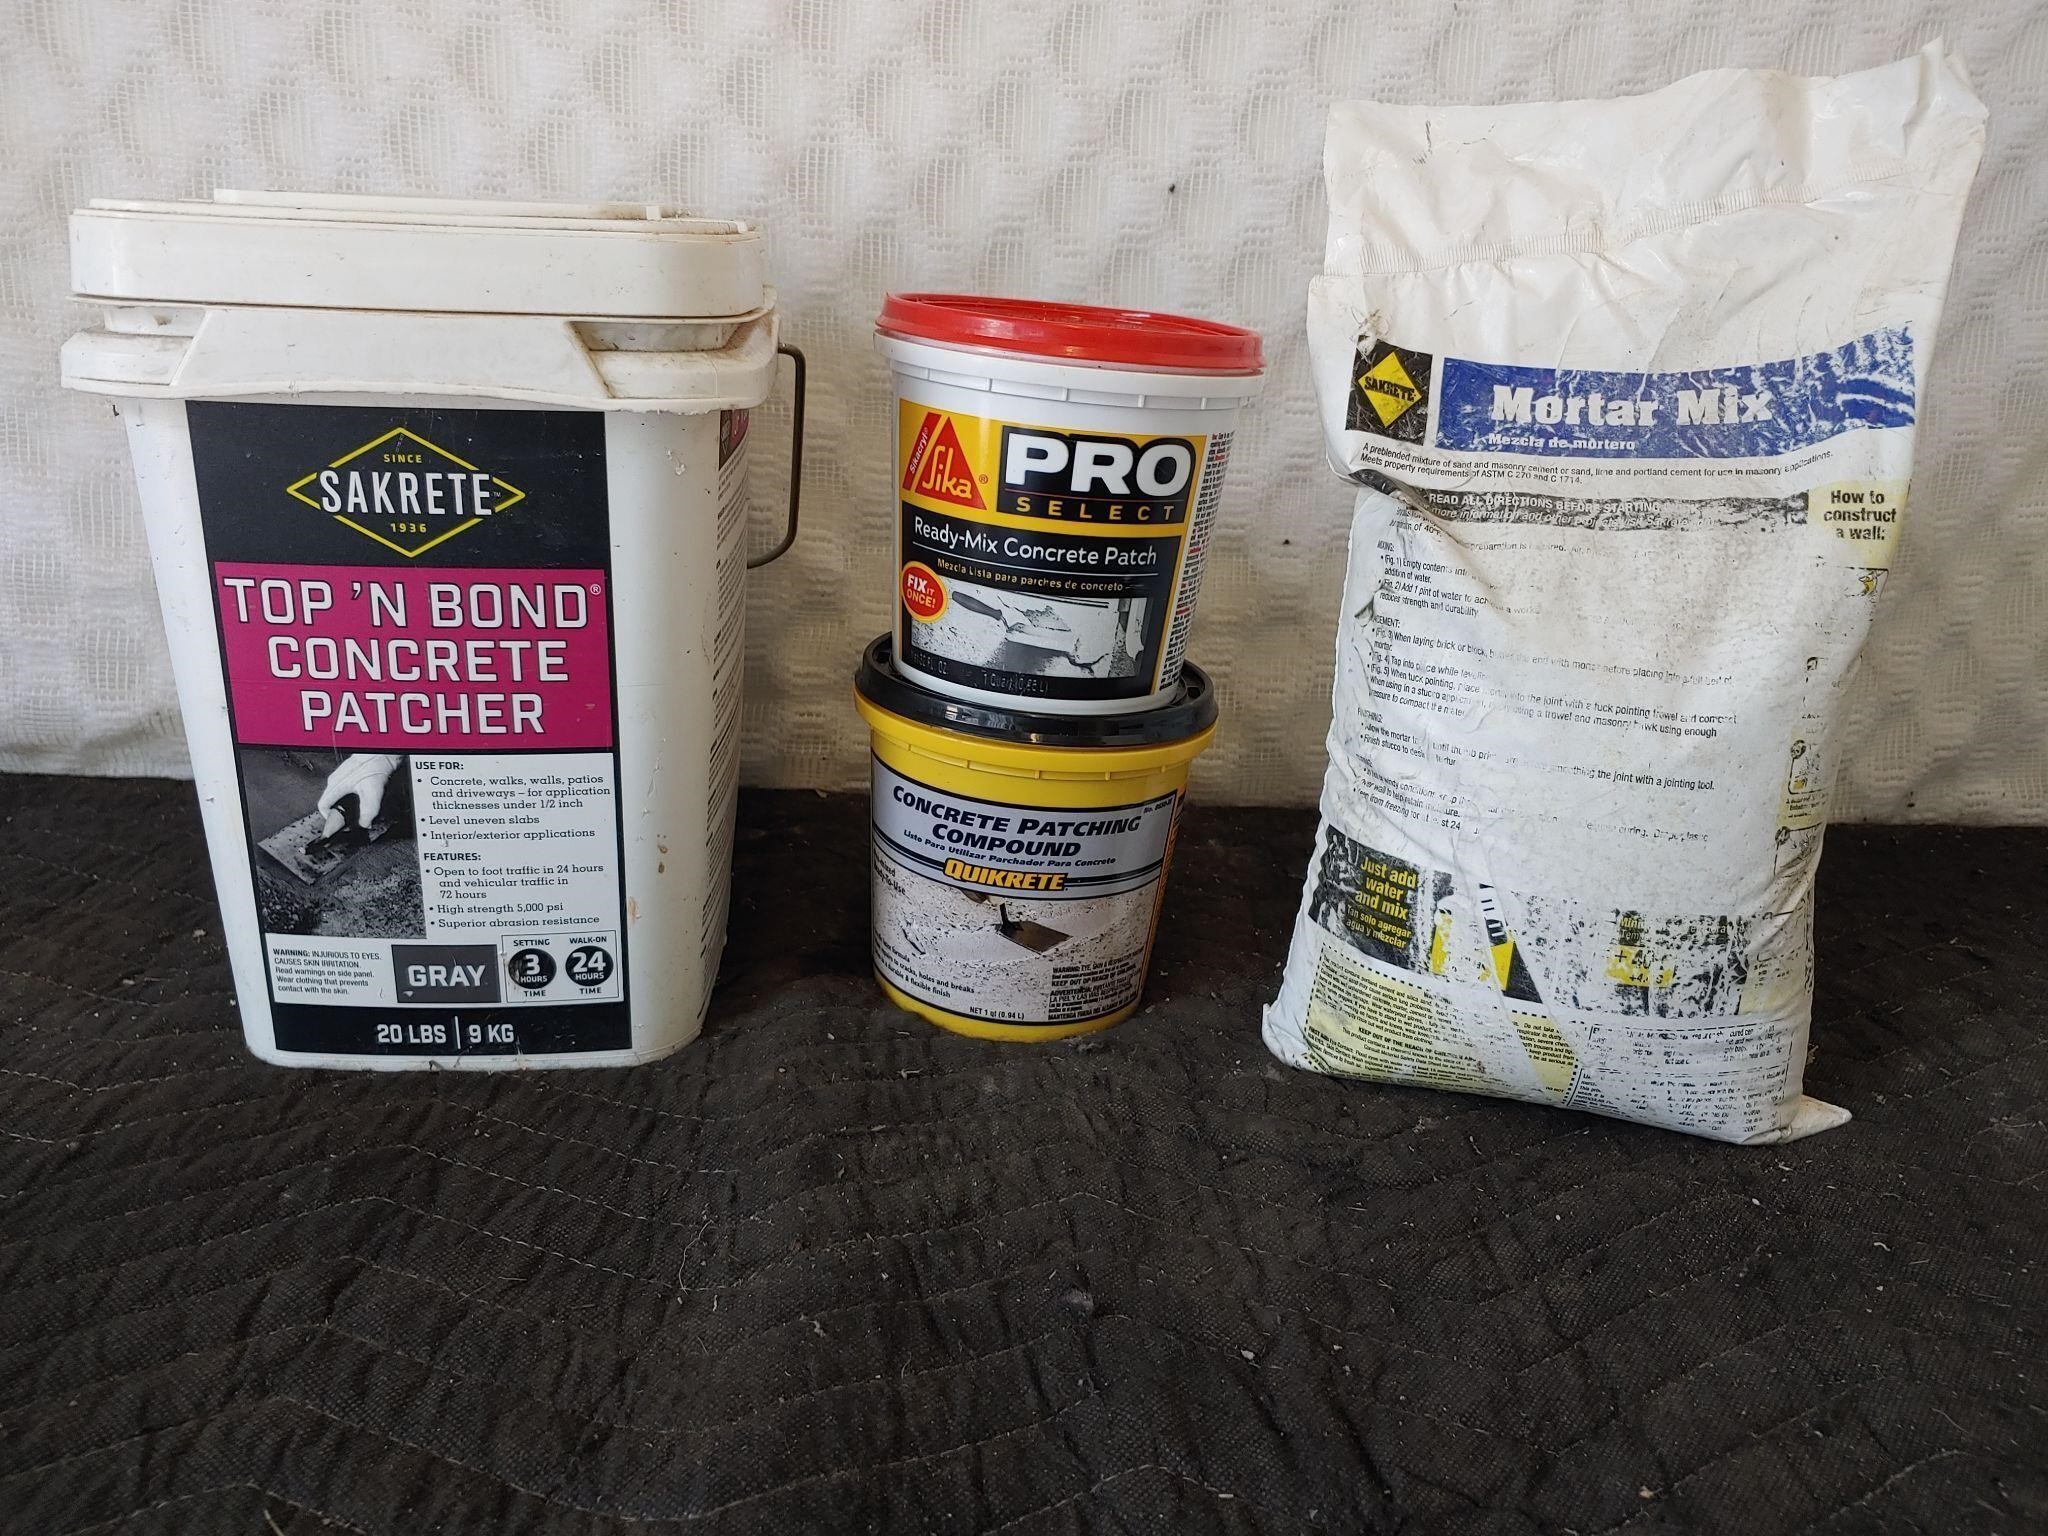 3 containers of concrete patch, 1 bag mortar mix